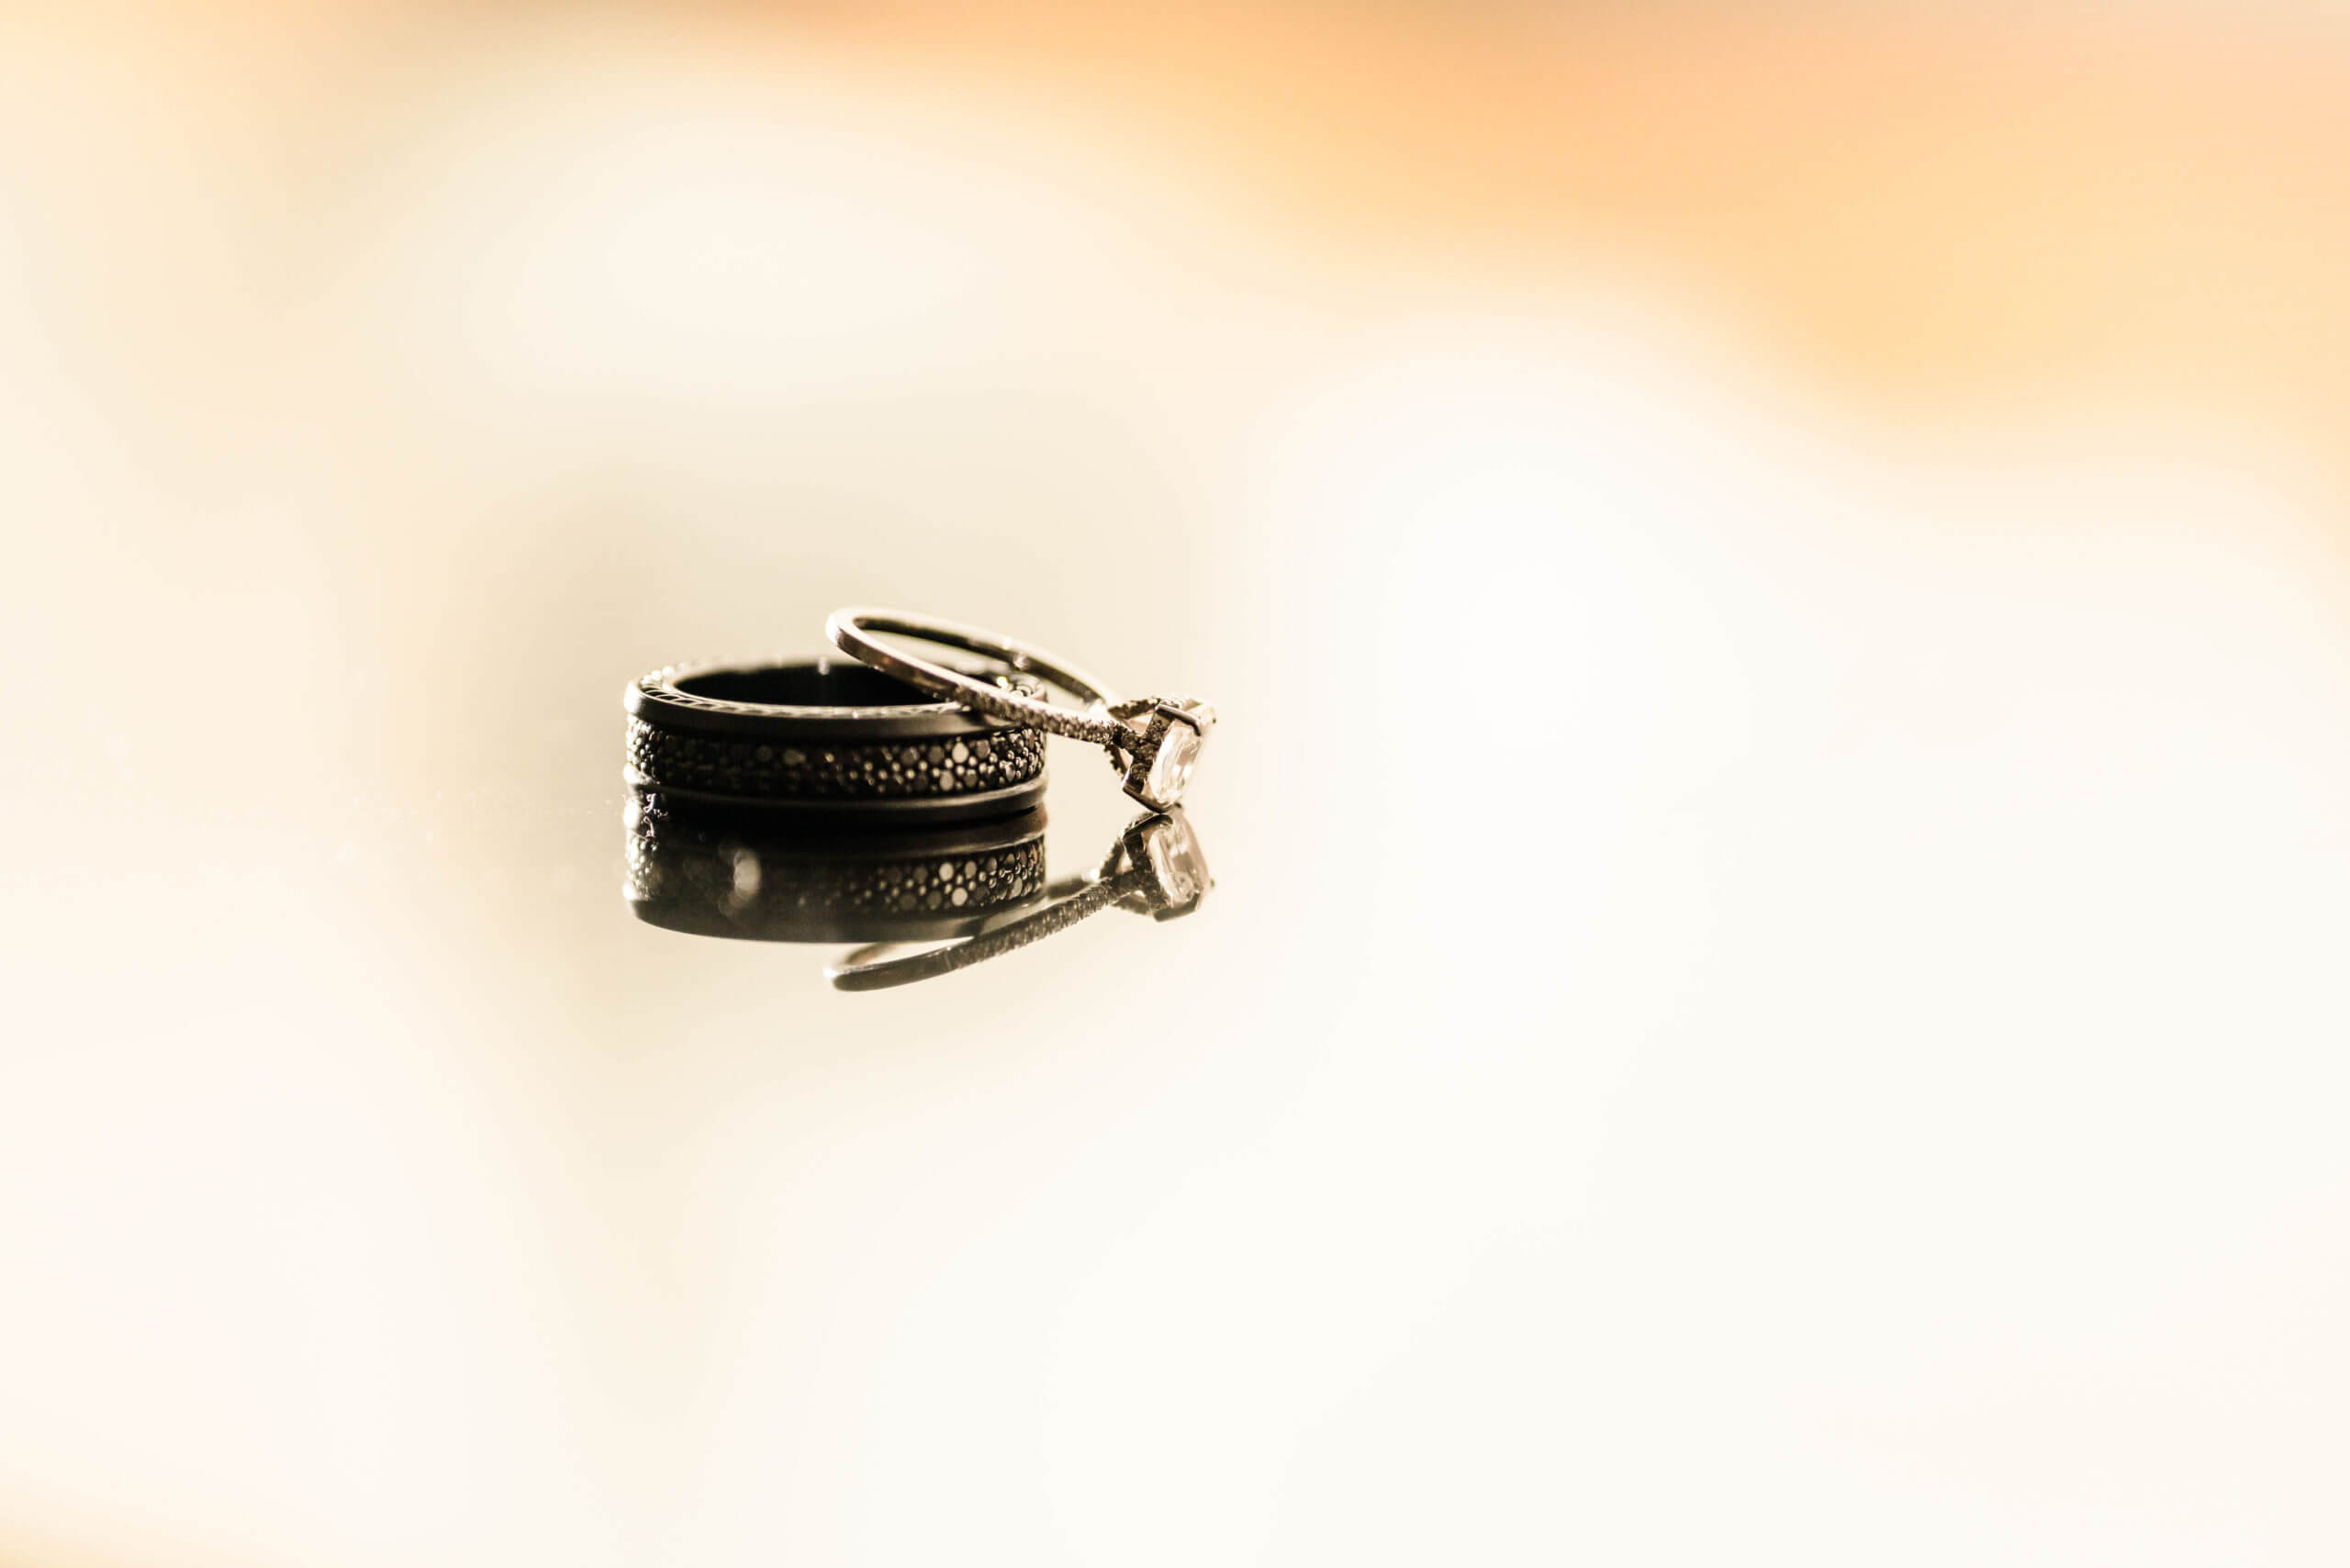 Wedding photography - Tips for detail shots of the wedding rings - Tangents